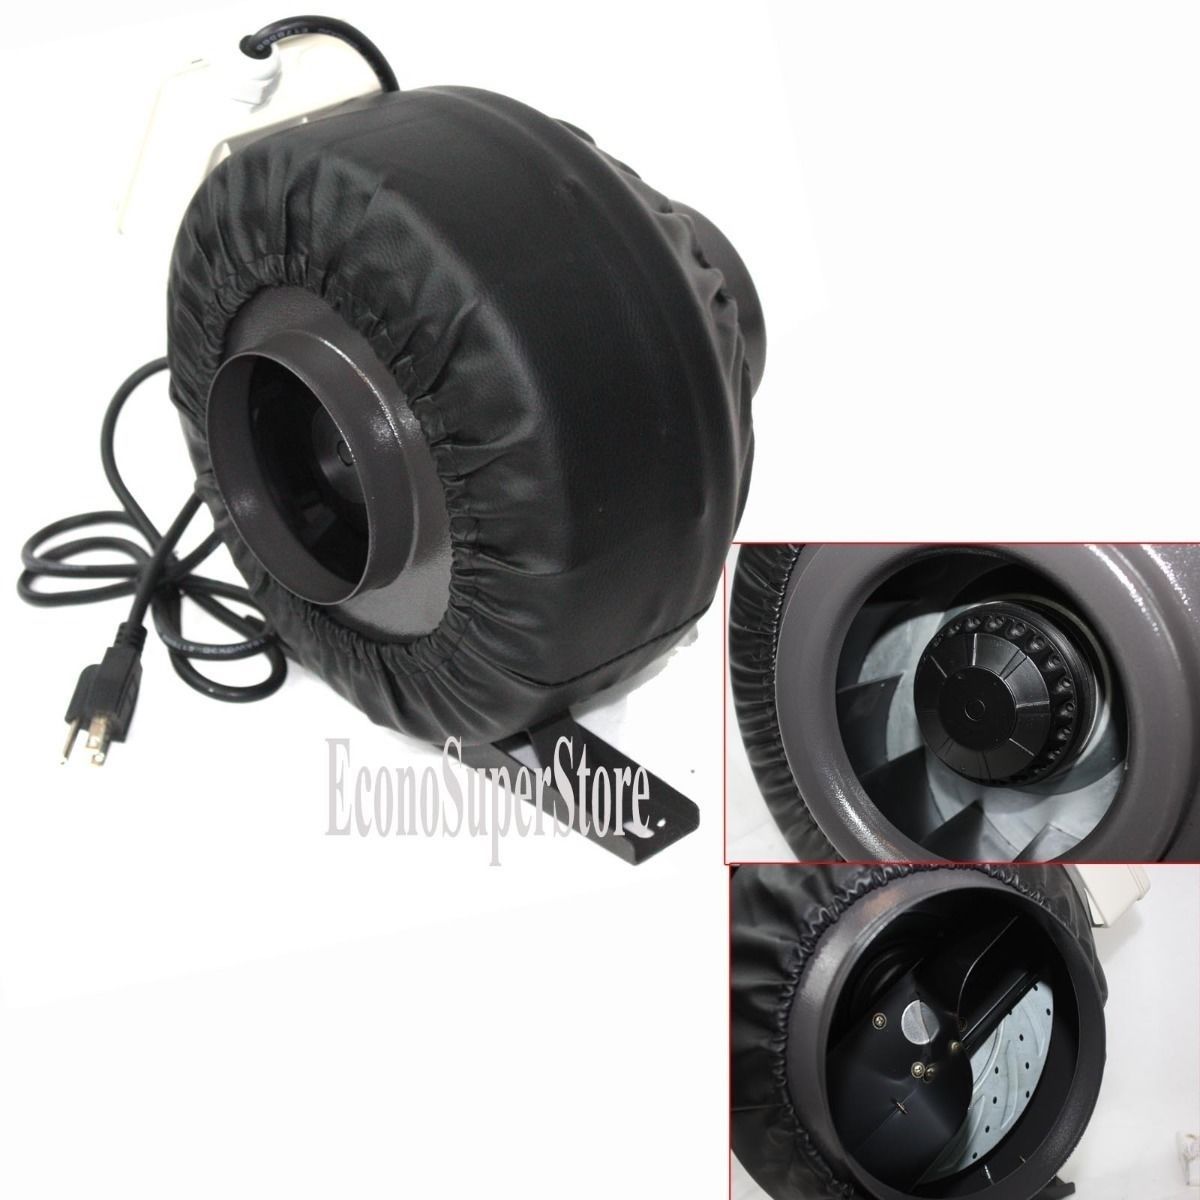 9TRADING 8 x 42 Carbon Air Filter Pro Combo 8 Inch Inline Fan Inline Exhaust Hydroponic 